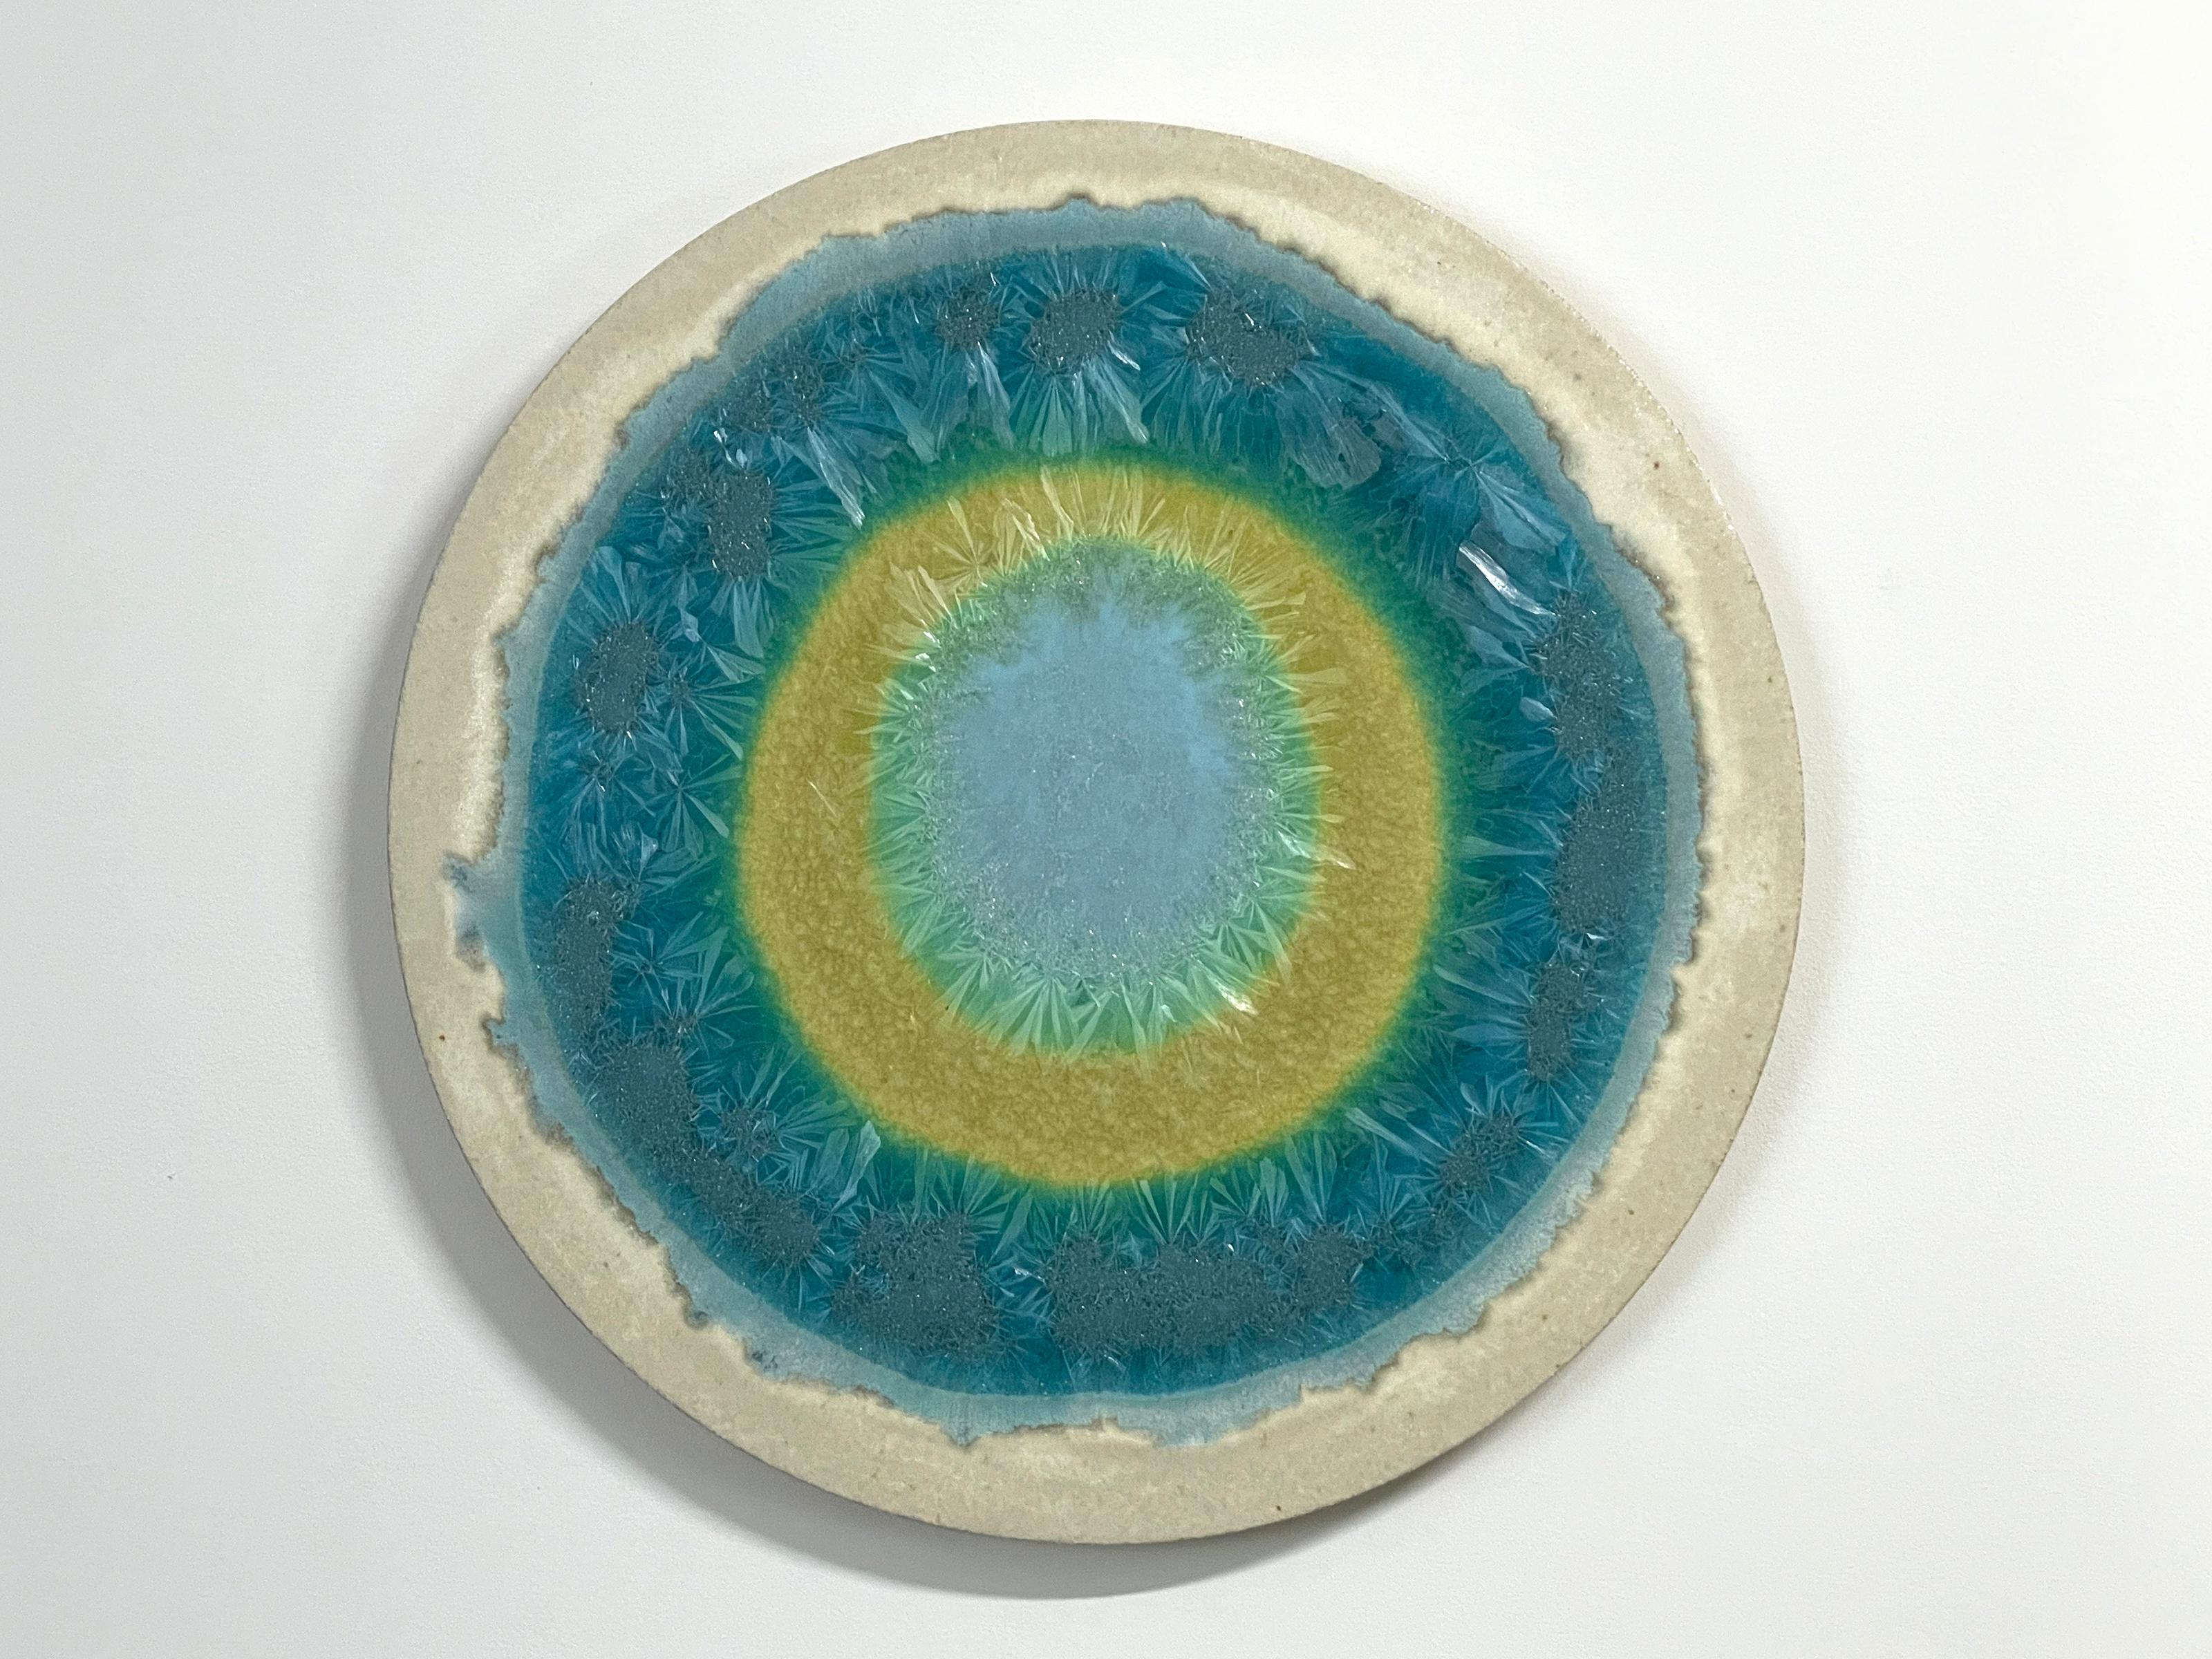 Angel's Tear
Ceramic crystal glaze painting by William Edwards
Hand rolled earthenware circular slab with crystal glaze. 

William received his BFA in sculpture from the historic San Francisco Art Institute and his MFA from UC Davis. William